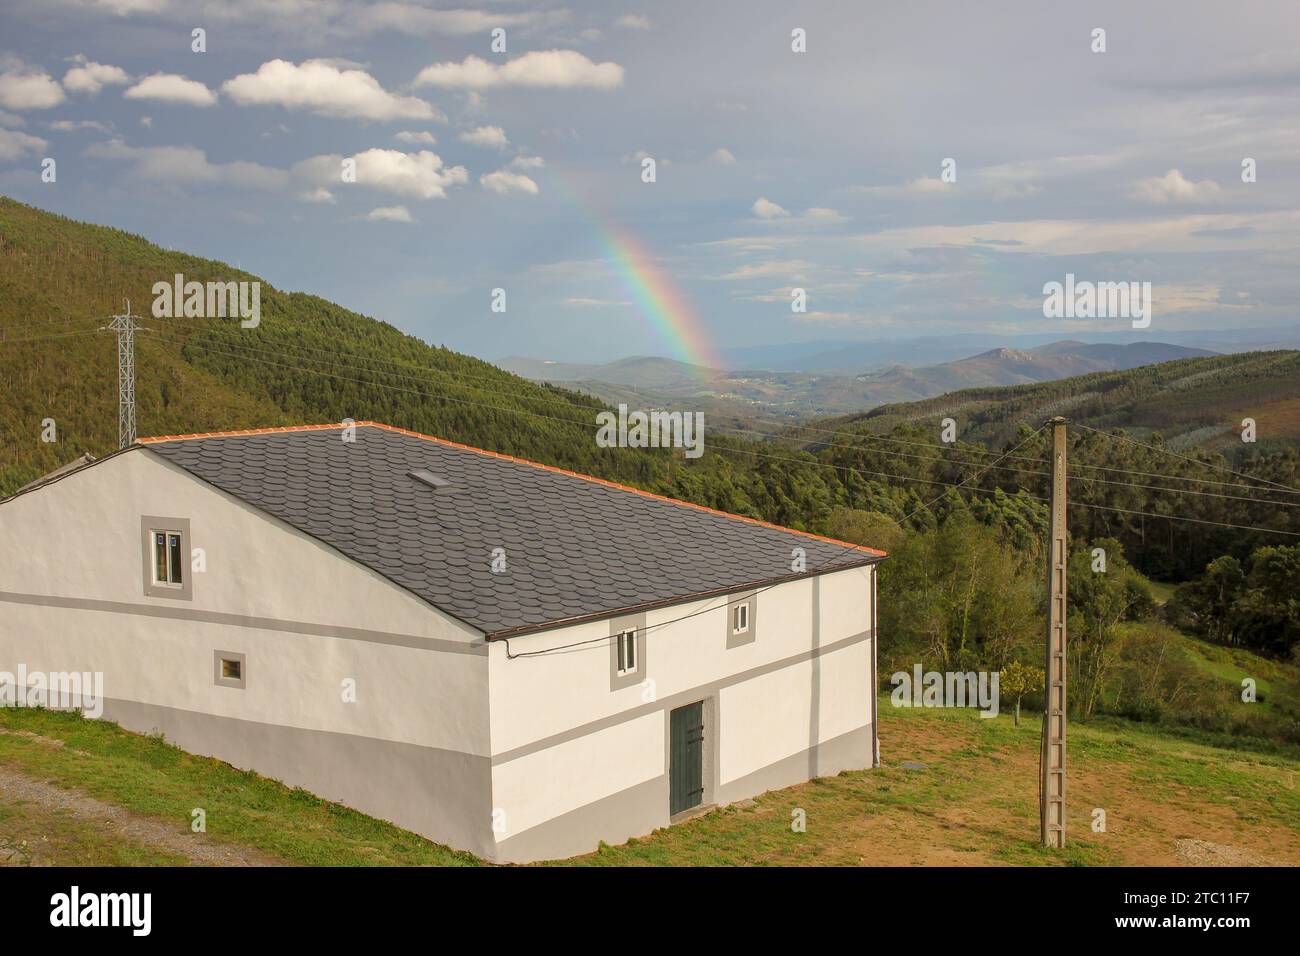 Serenity at Home: Rainbow Over Green Hills and White House Stock Photo